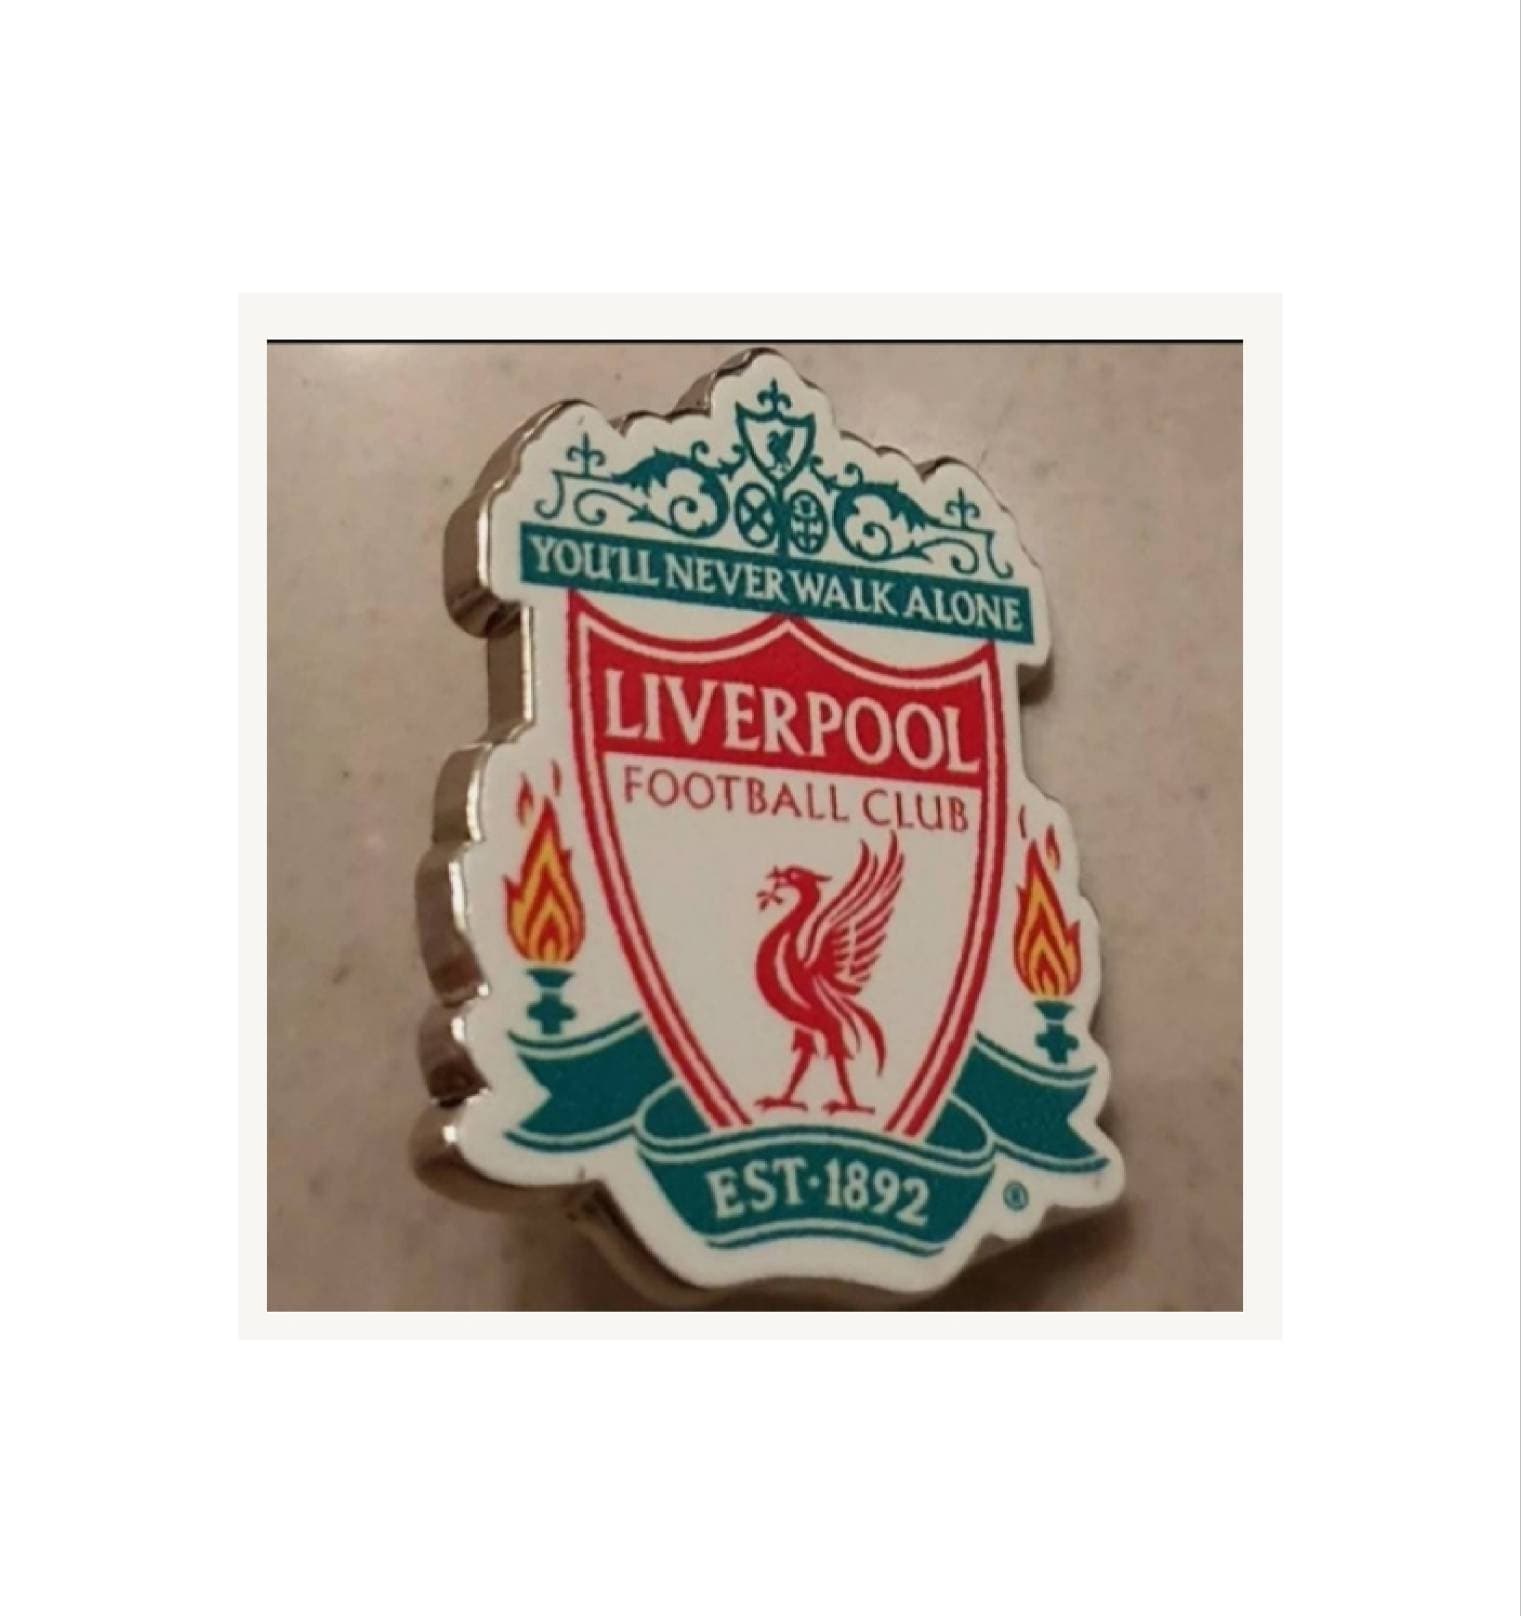 Pin on liverpool